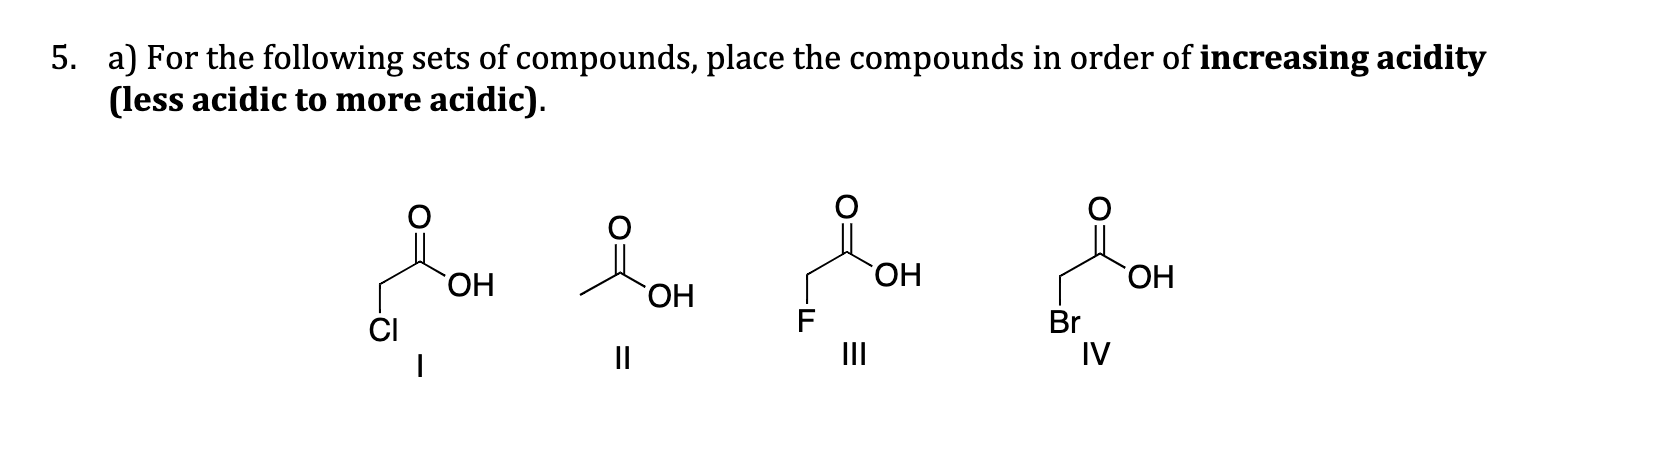 a) For the following sets of compounds, place the compounds in order of increasing acidity
(less acidic to more acidic).
ОН
HO.
HO.
ОН
F
II
Br
IV
CI
